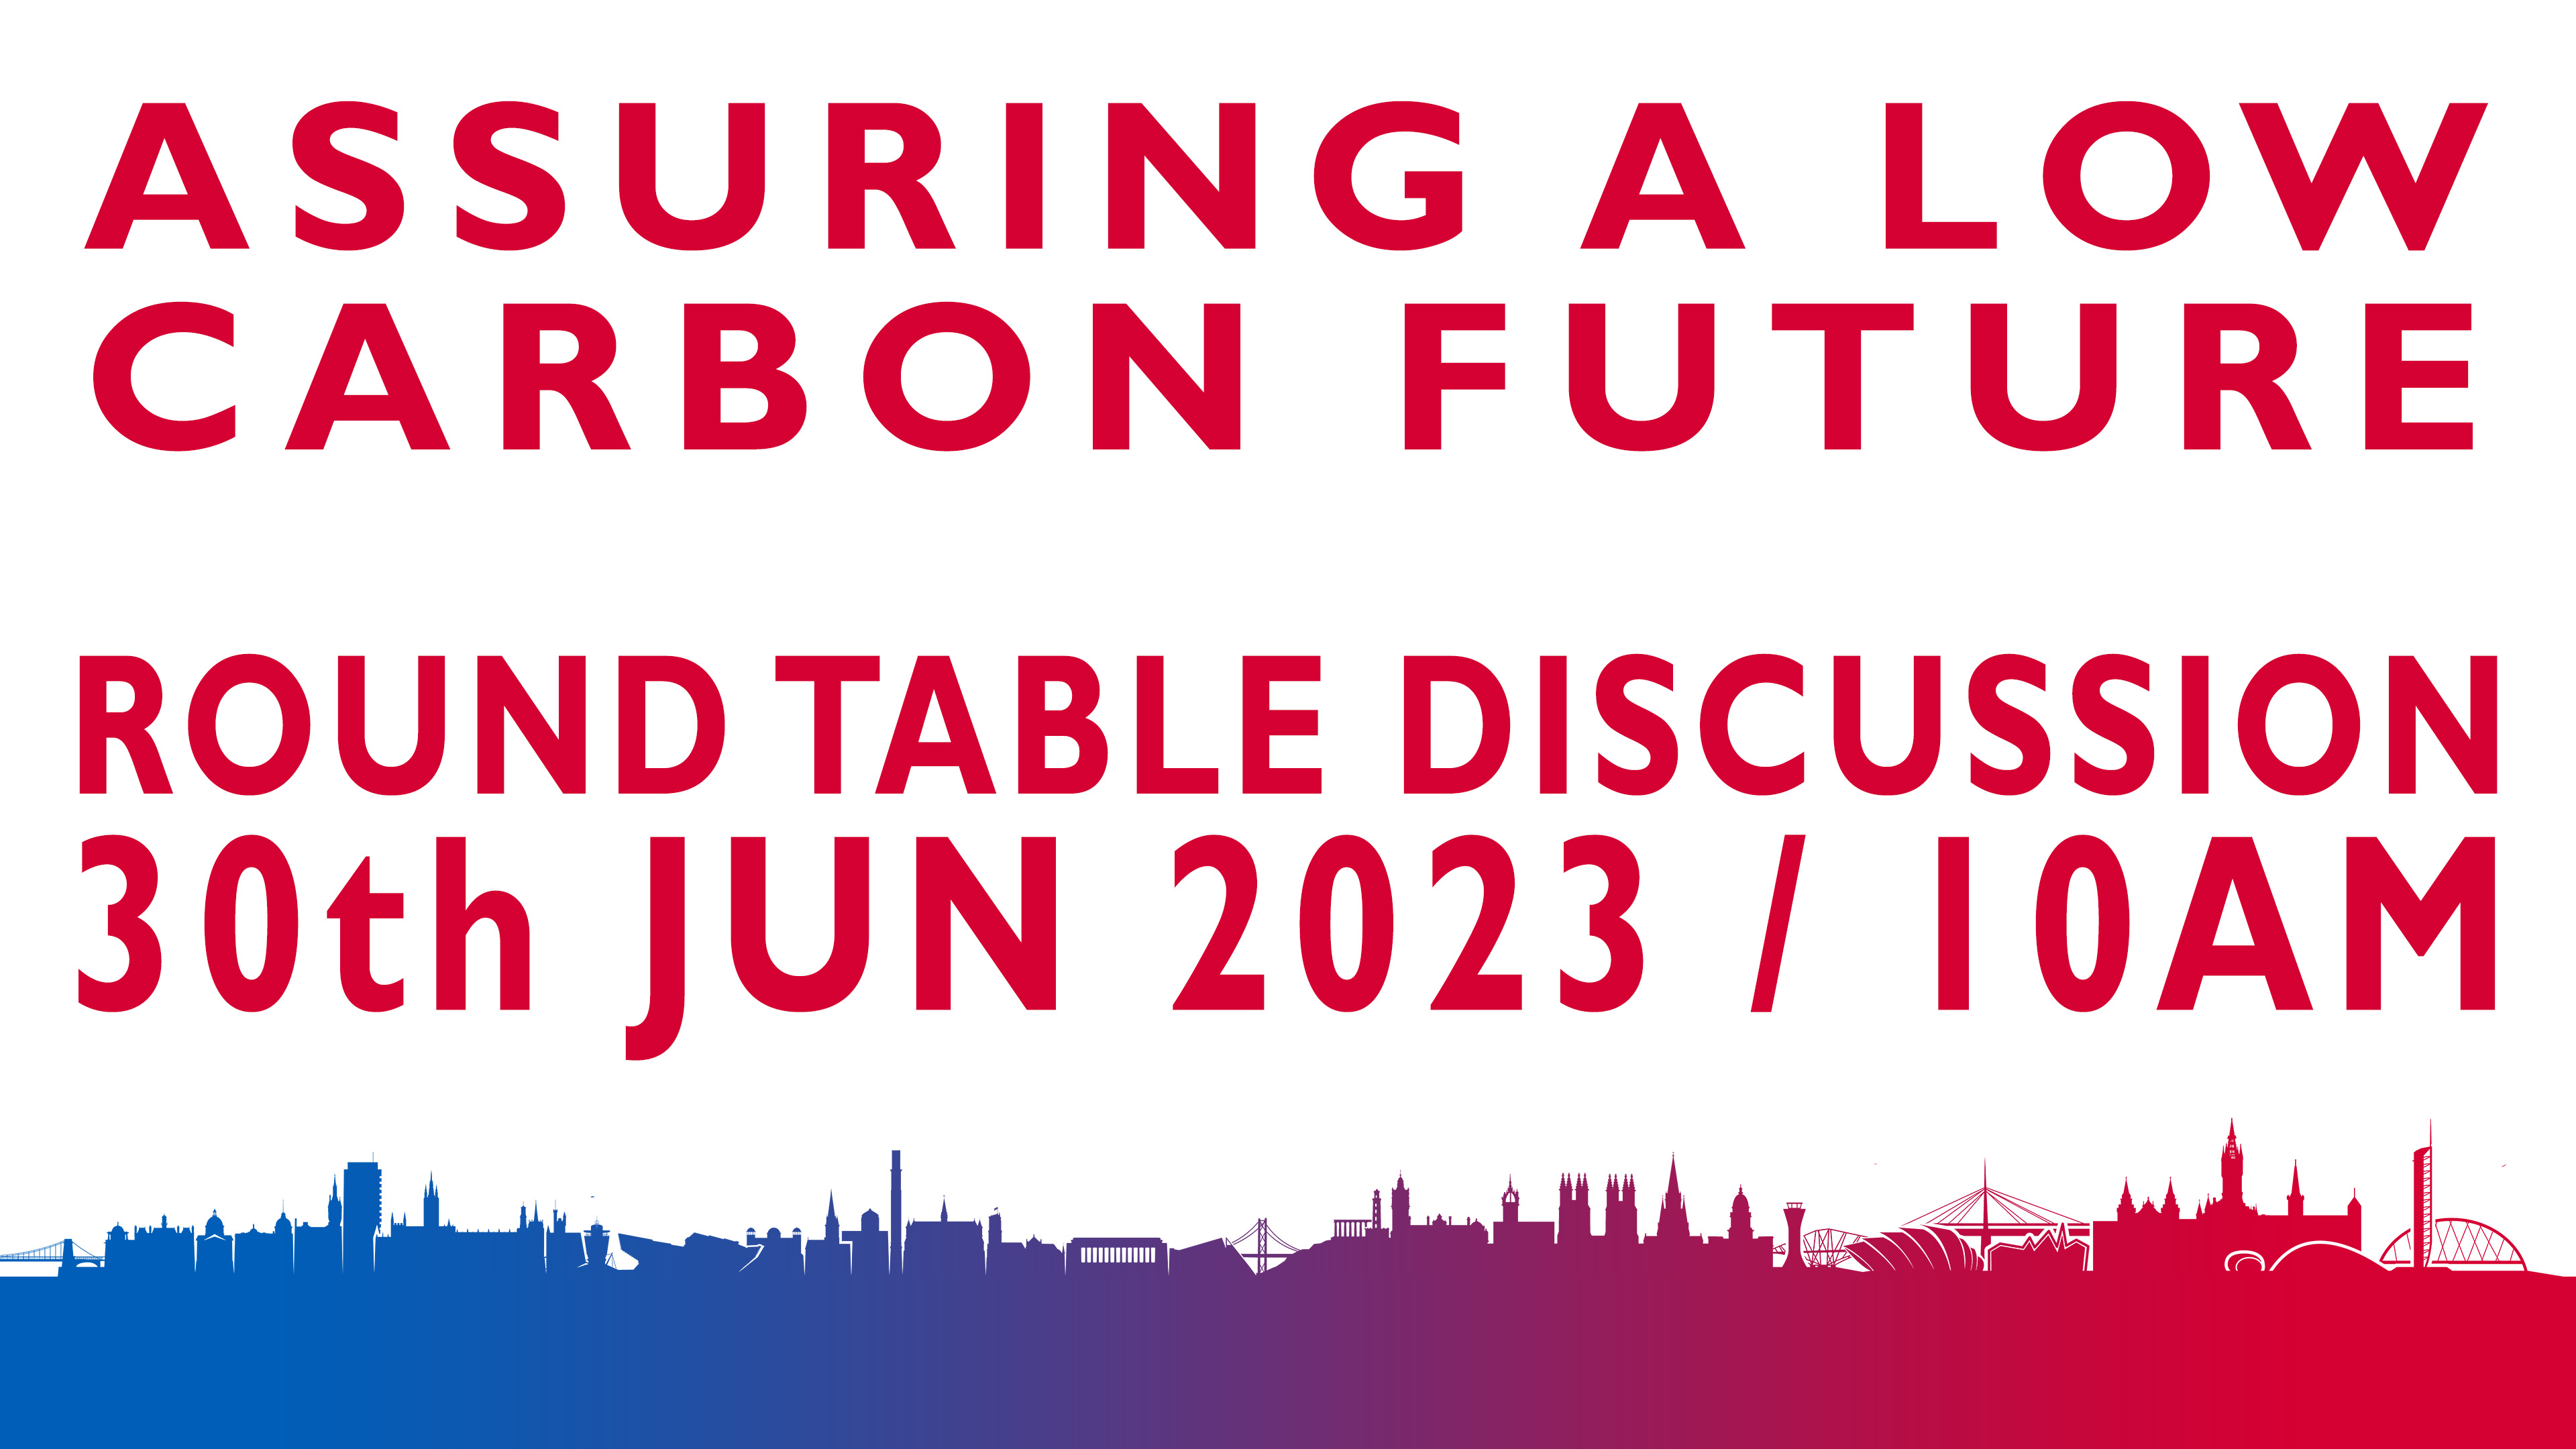 The discussion will explore the future of Passivhaus and other low energy design strategies as part of the journey towards Net-Zero and beyond.